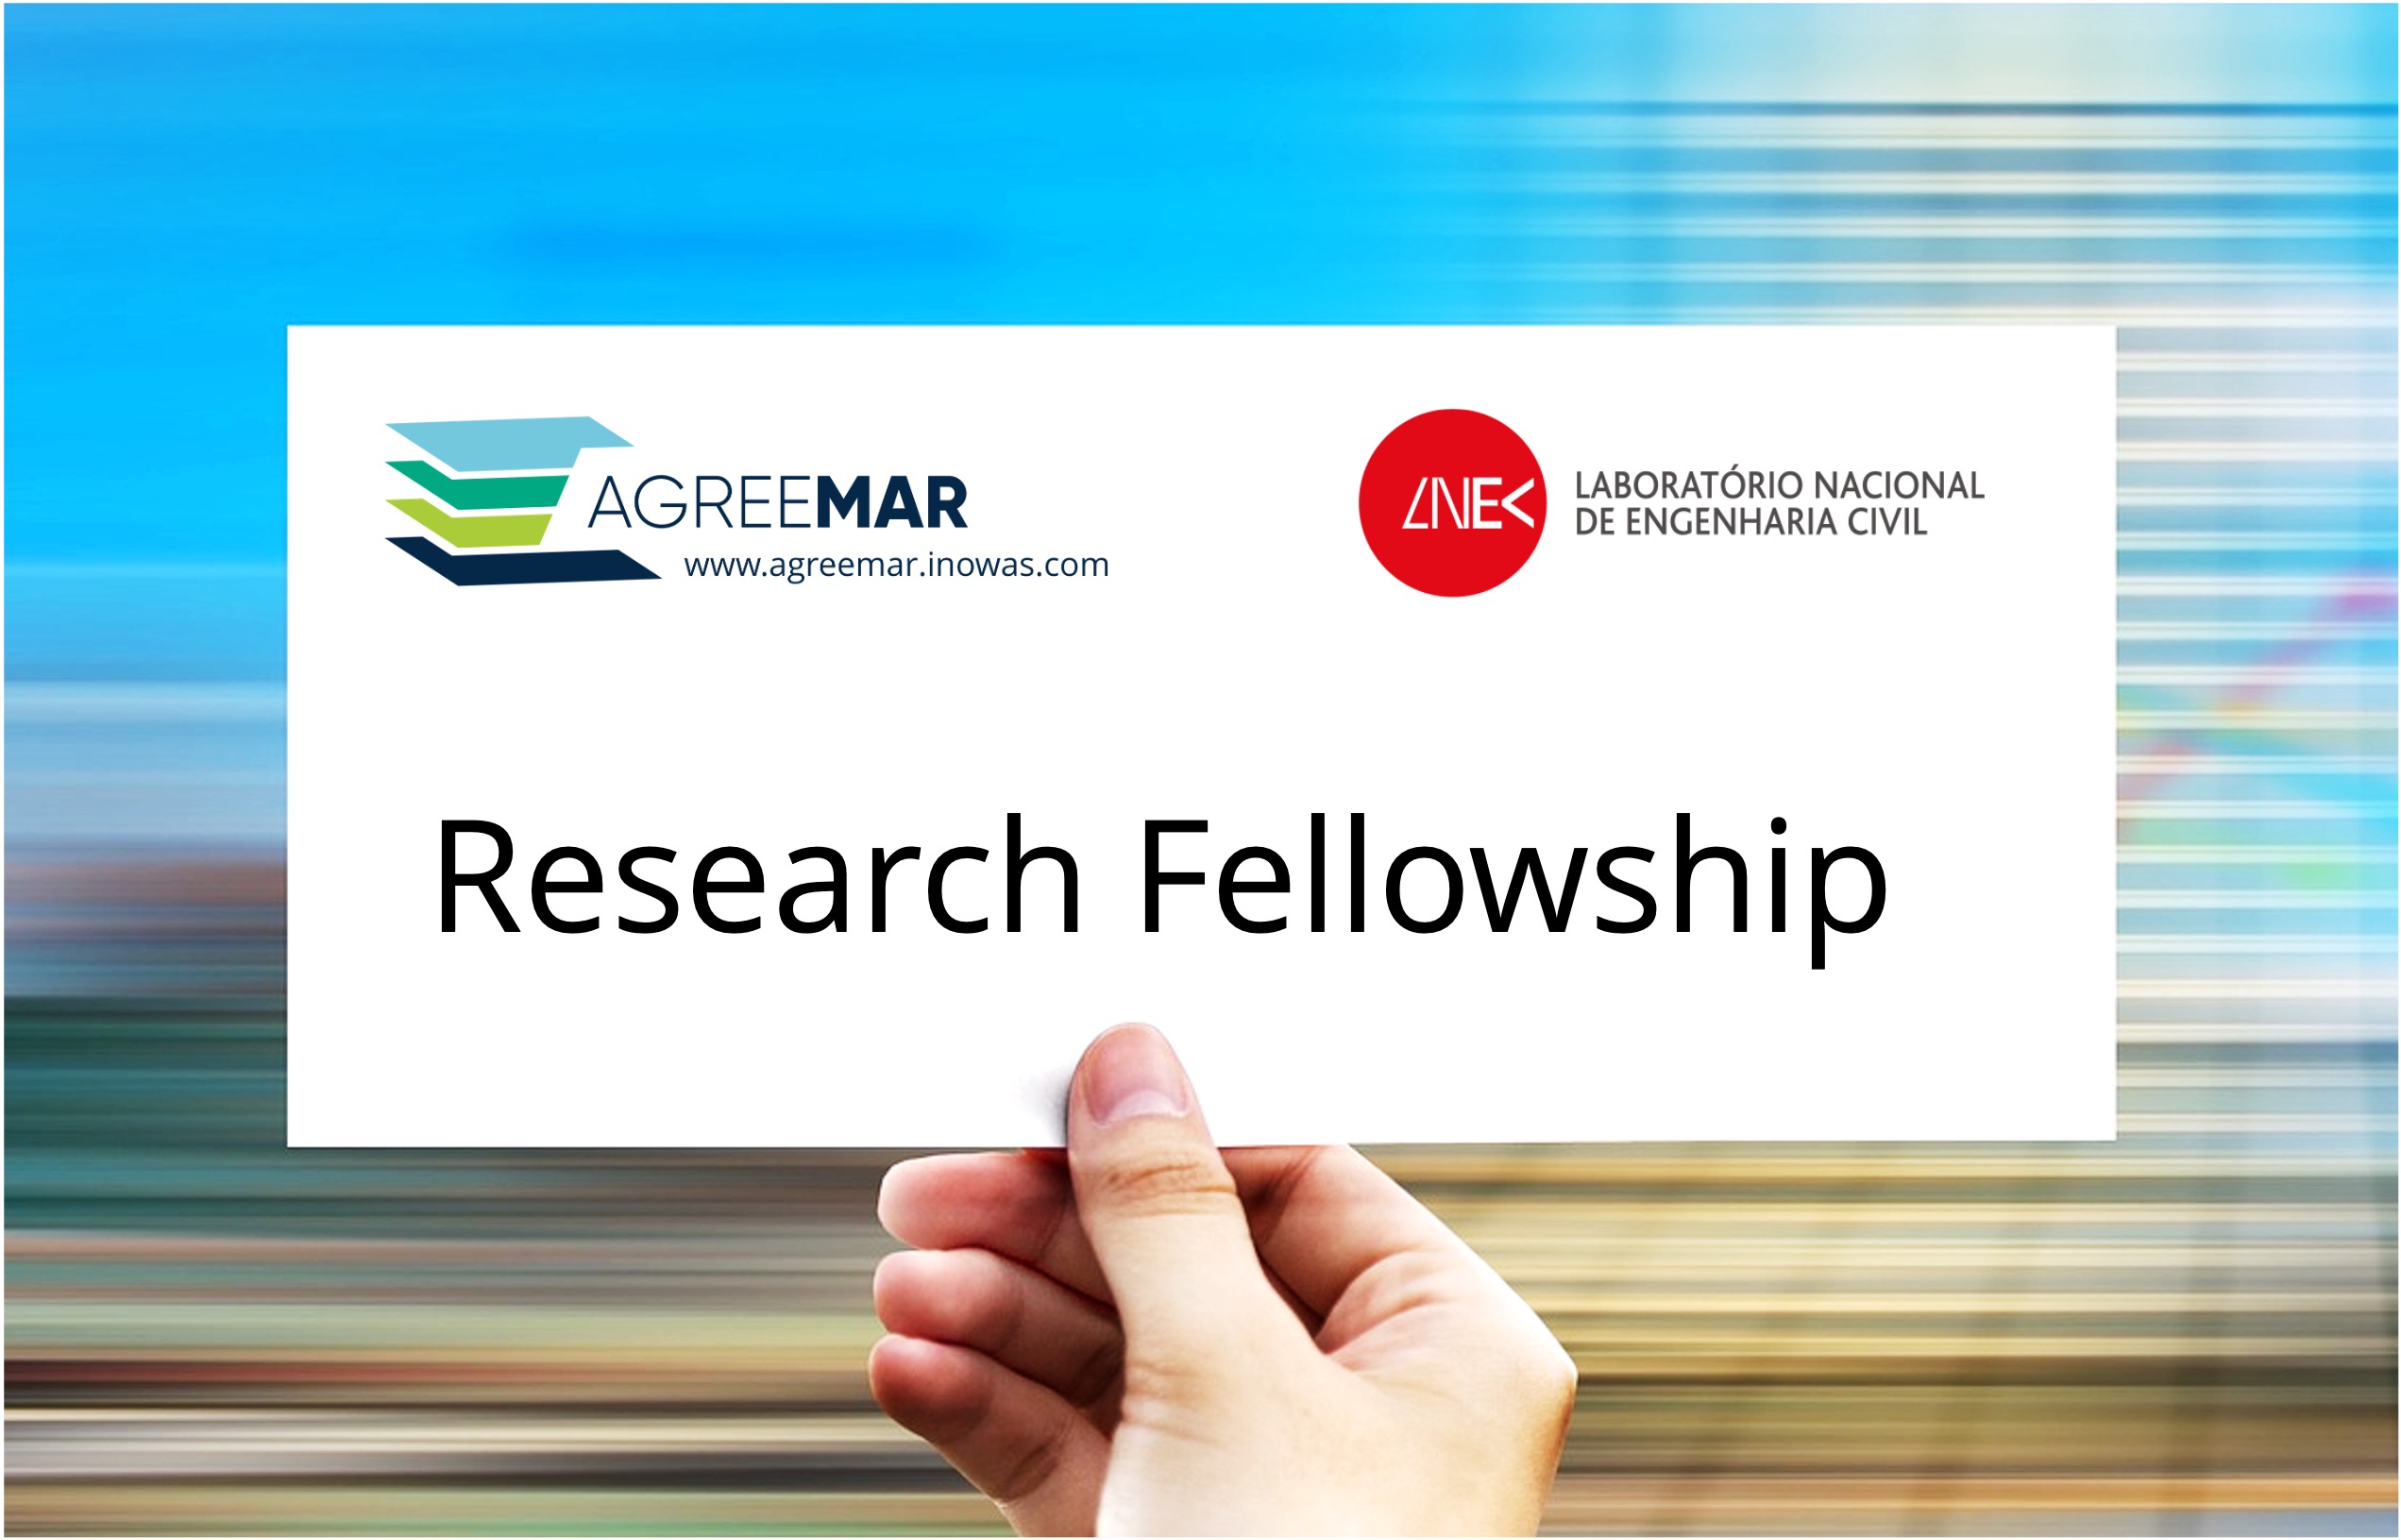 LNEC launches a call for awarding a research fellowship